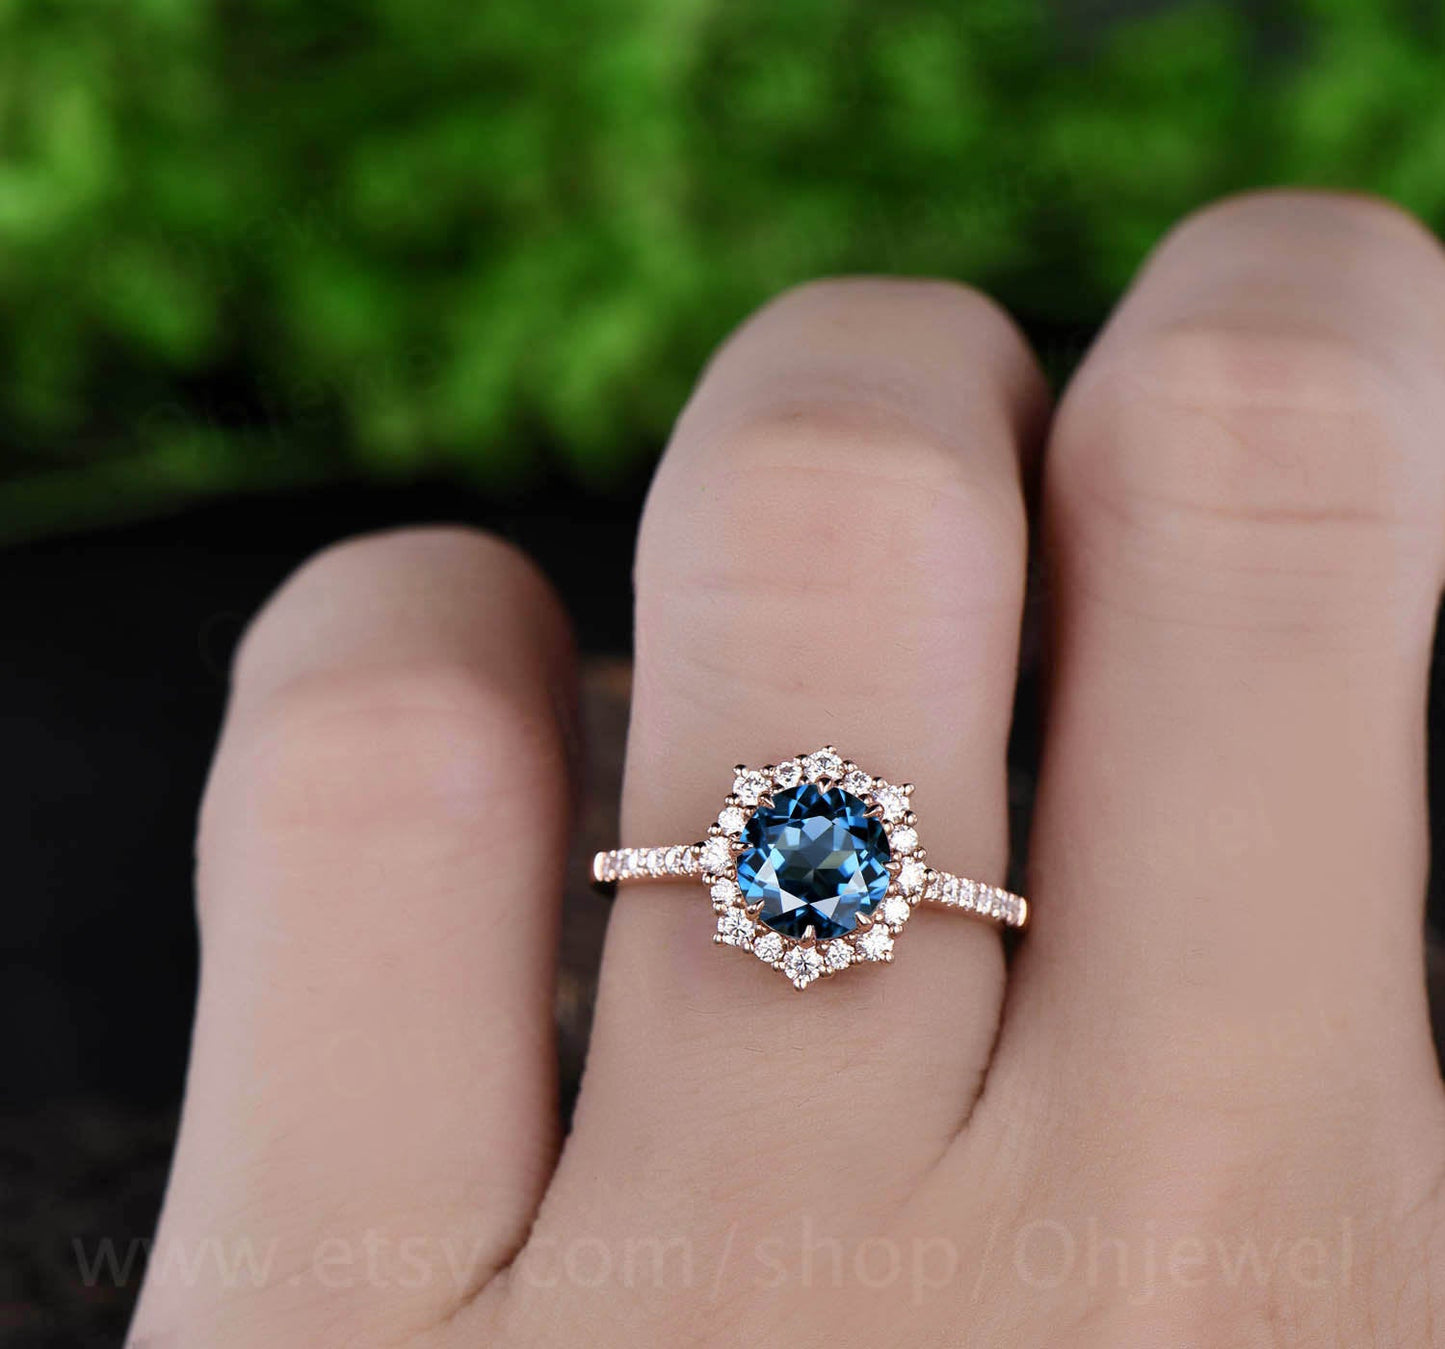 1ct round topaz ring for women vintage unique halo cluster moissanite ring London blue topaz engagement ring rose gold wedding ring band